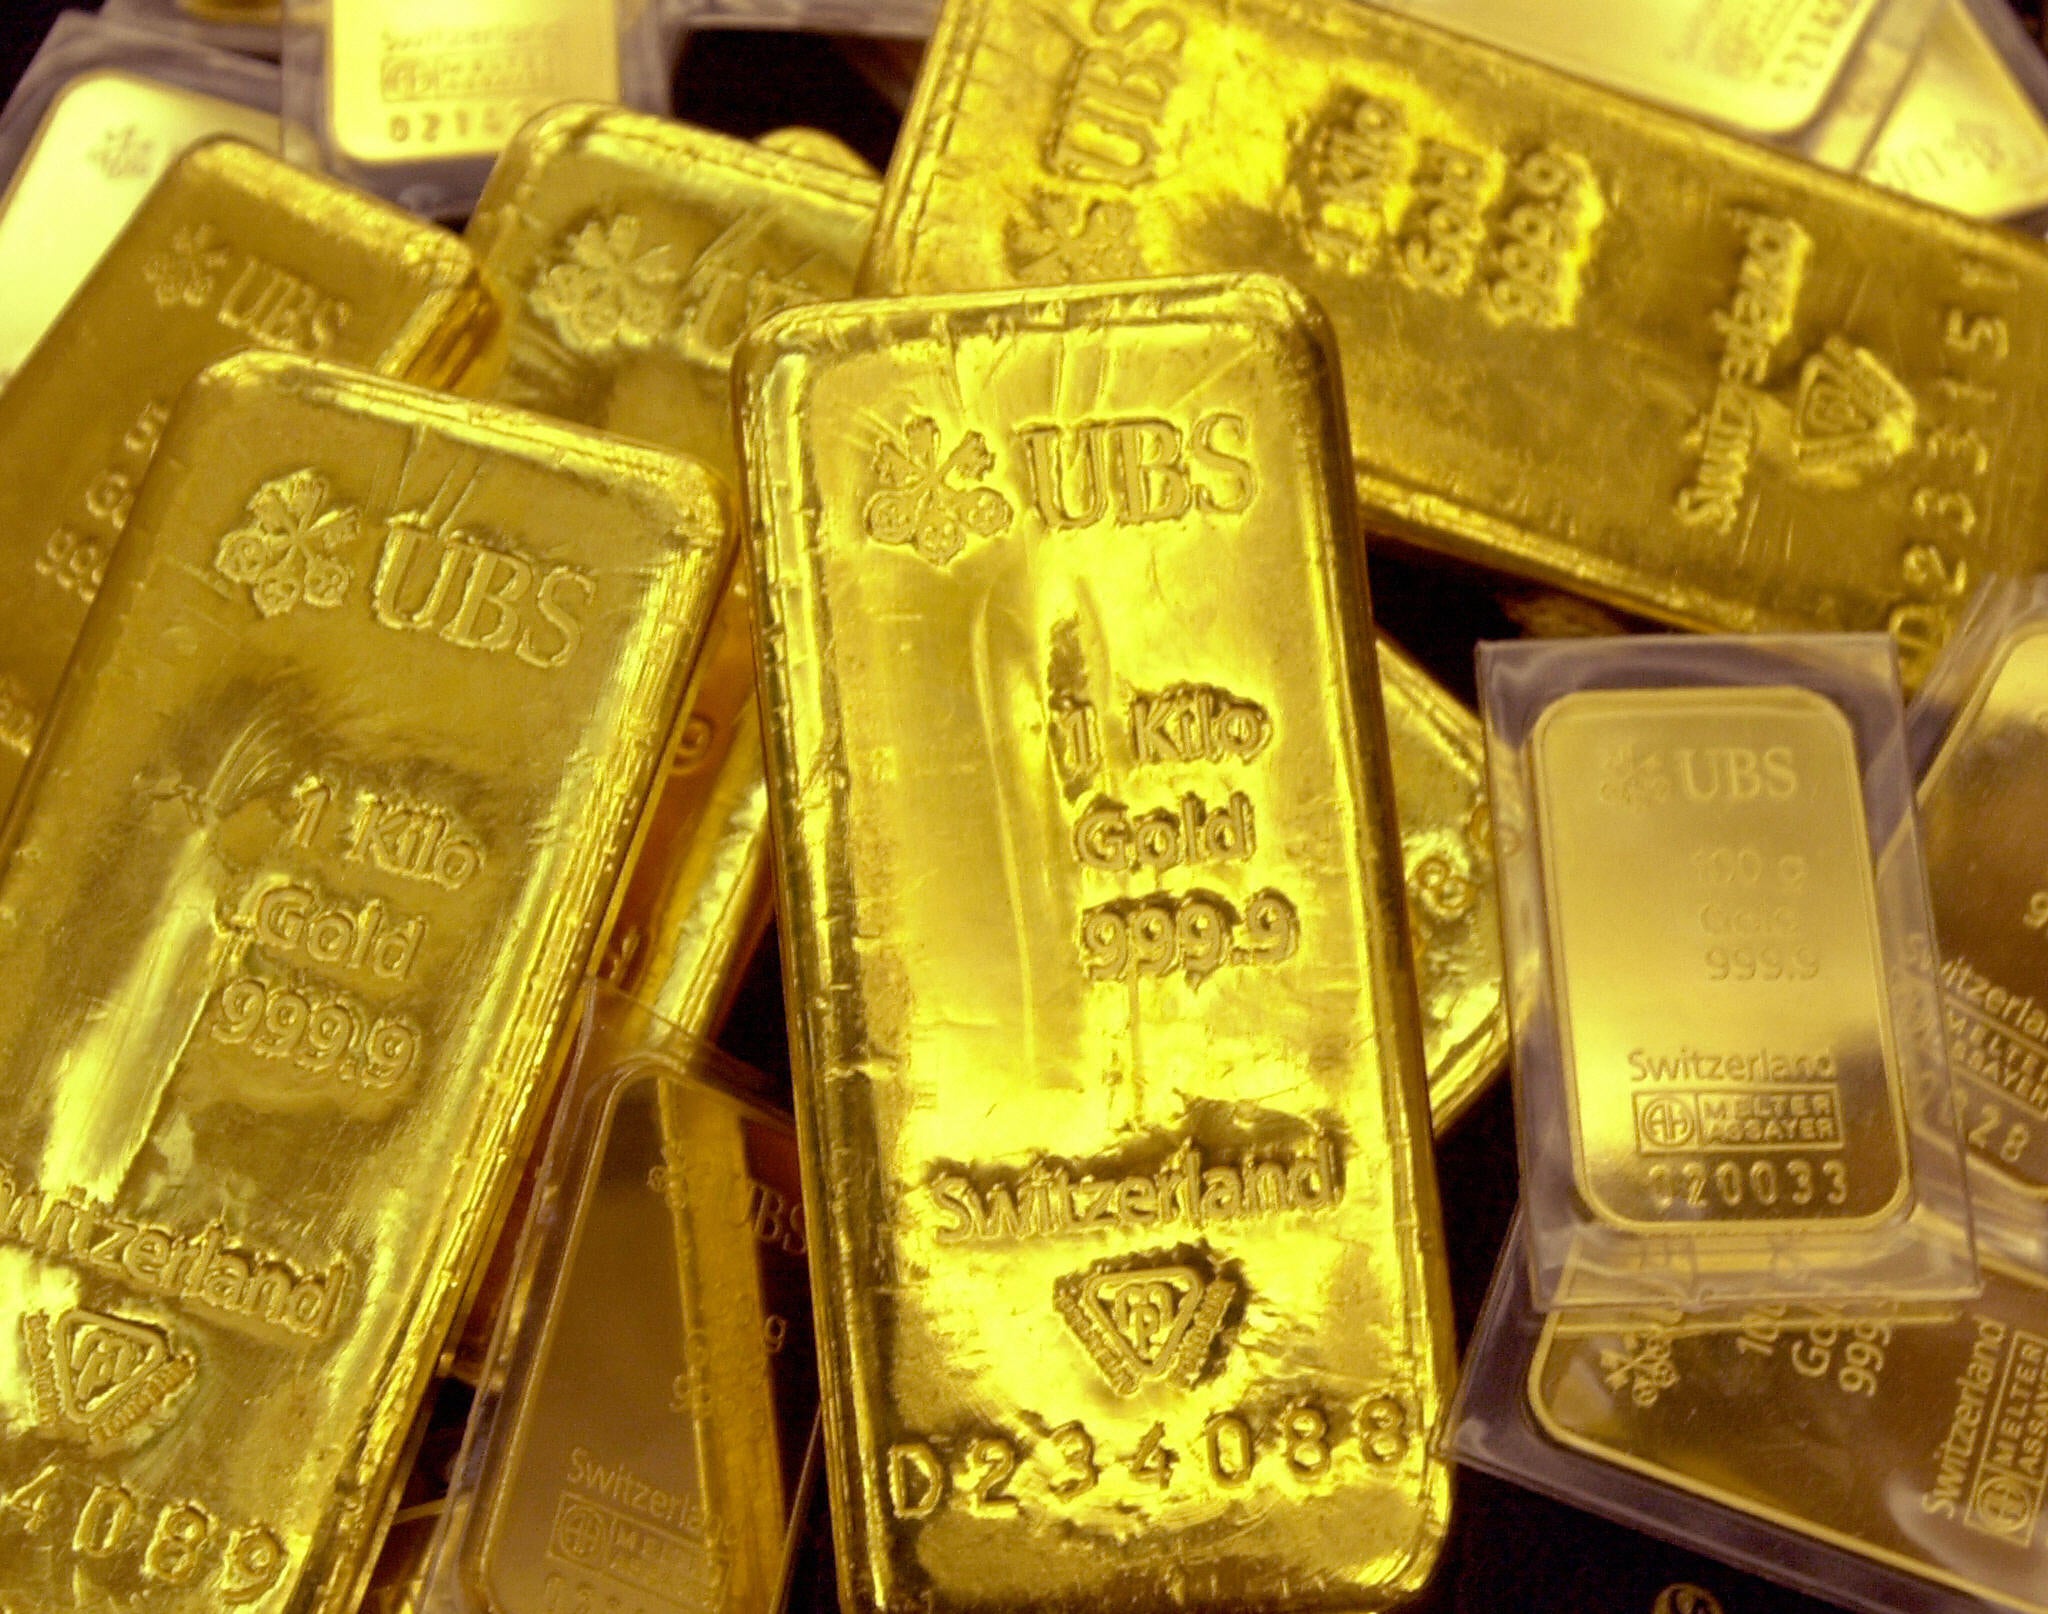 World Gold Council says global uncertainty is likely to boost demand further